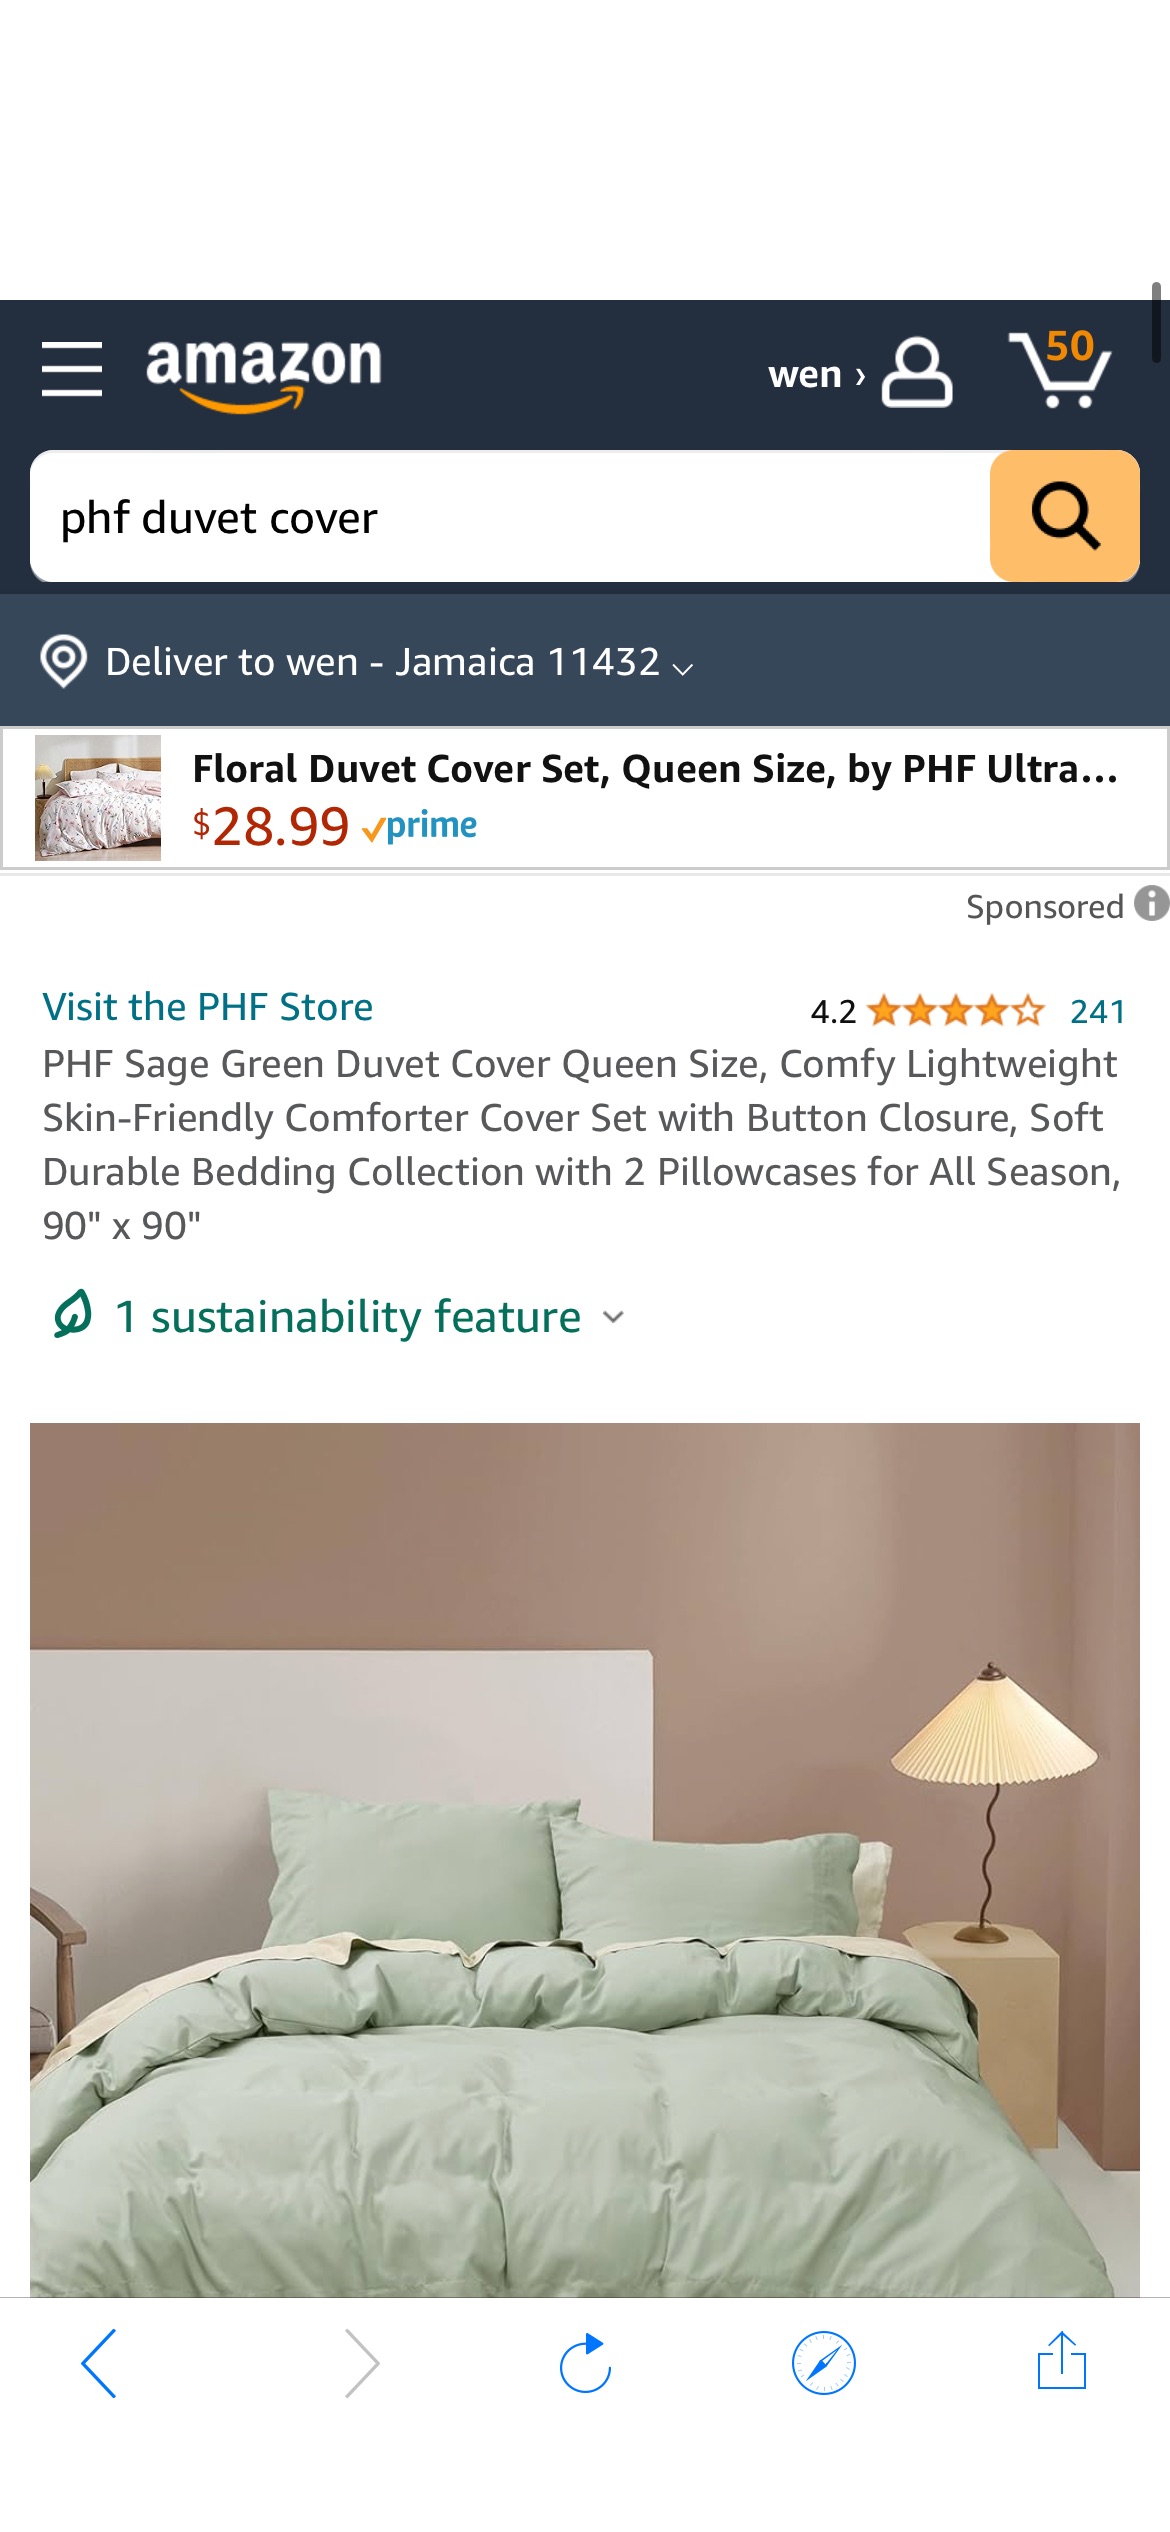 Amazon.com: PHF Sage Green Duvet Cover Queen Size, Comfy Lightweight Skin-Friendly Comforter Cover Set with Button Closure, Soft Durable Bedding Collection with 2 Pillowcases for All Season, 90" x 90"